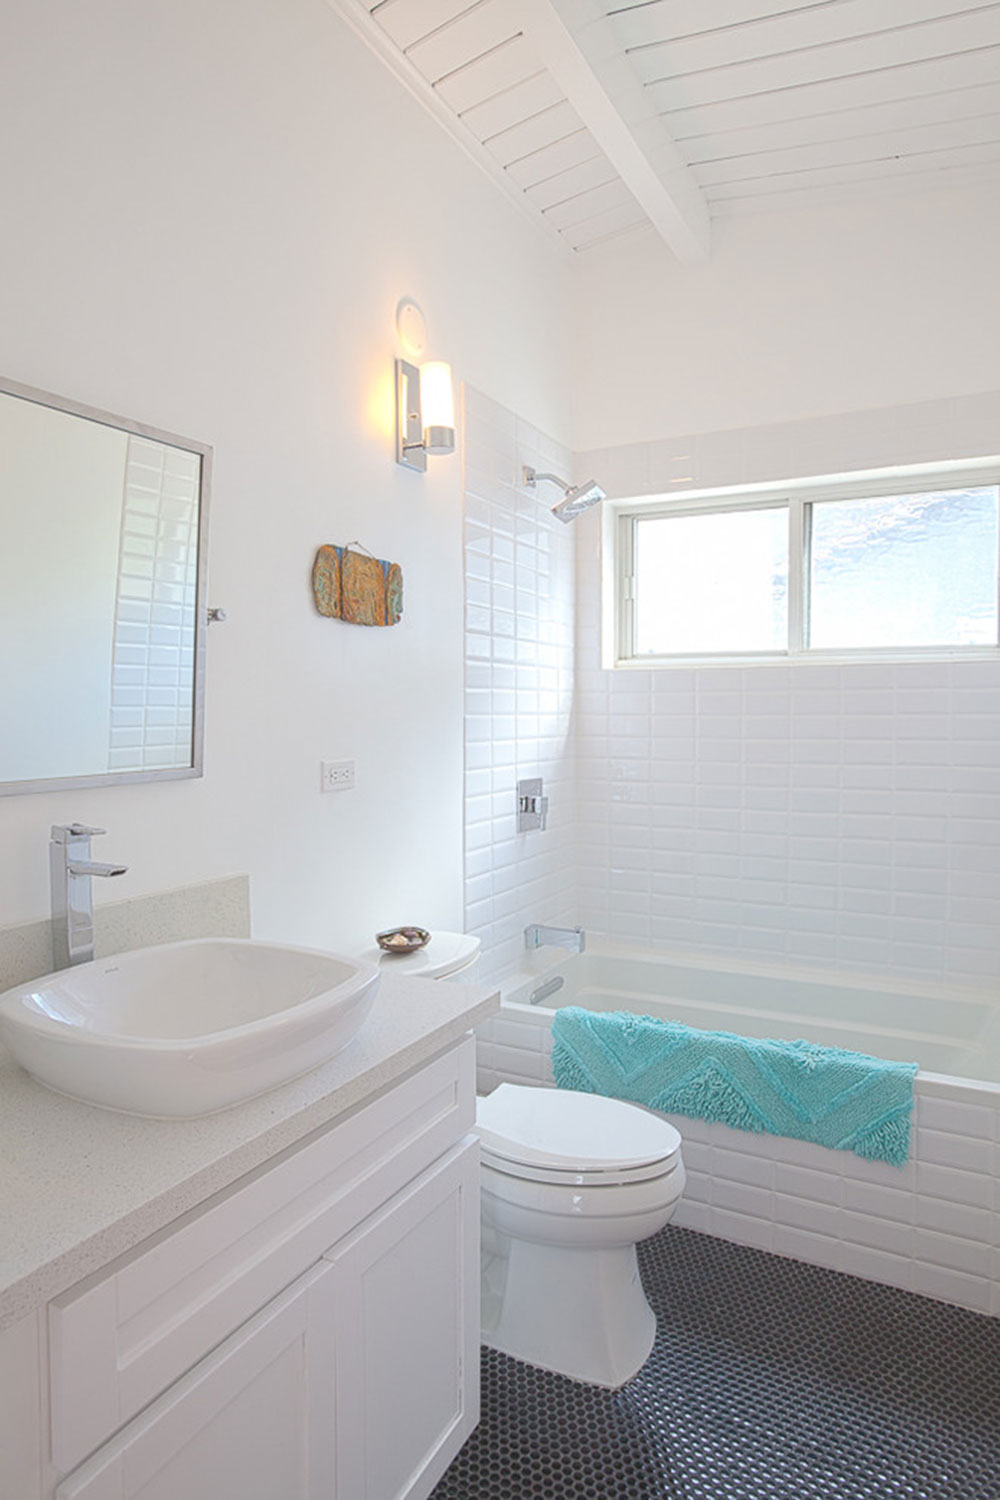 Westchester-Rehab-by-Carley-Montgomery Small bathroom remodel tips to do it properly